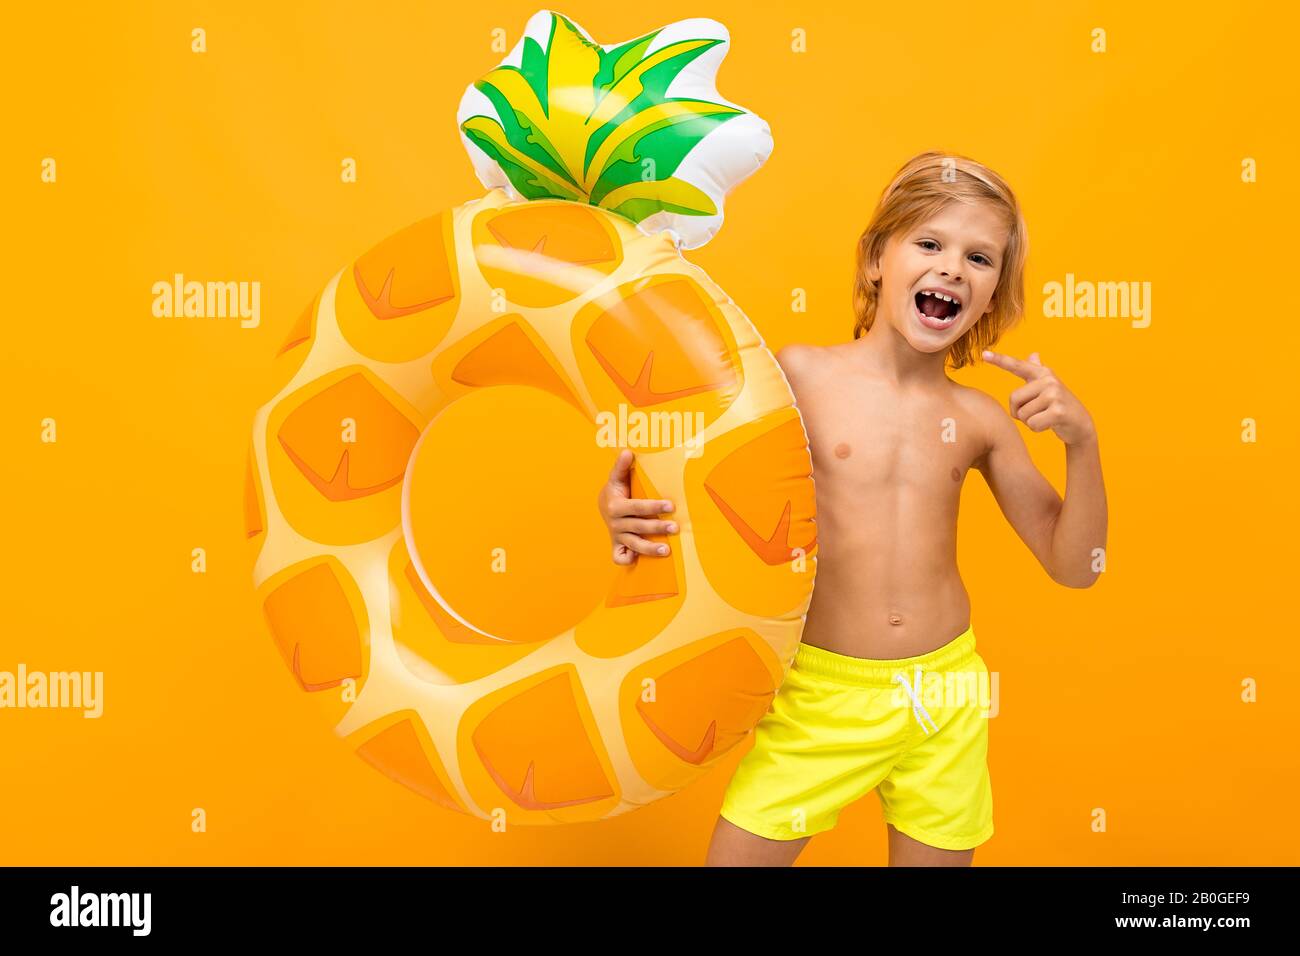 Handsome boy in swimming trunks holds a rubber ring, smiles and gesticulates isolated on orange background Stock Photo